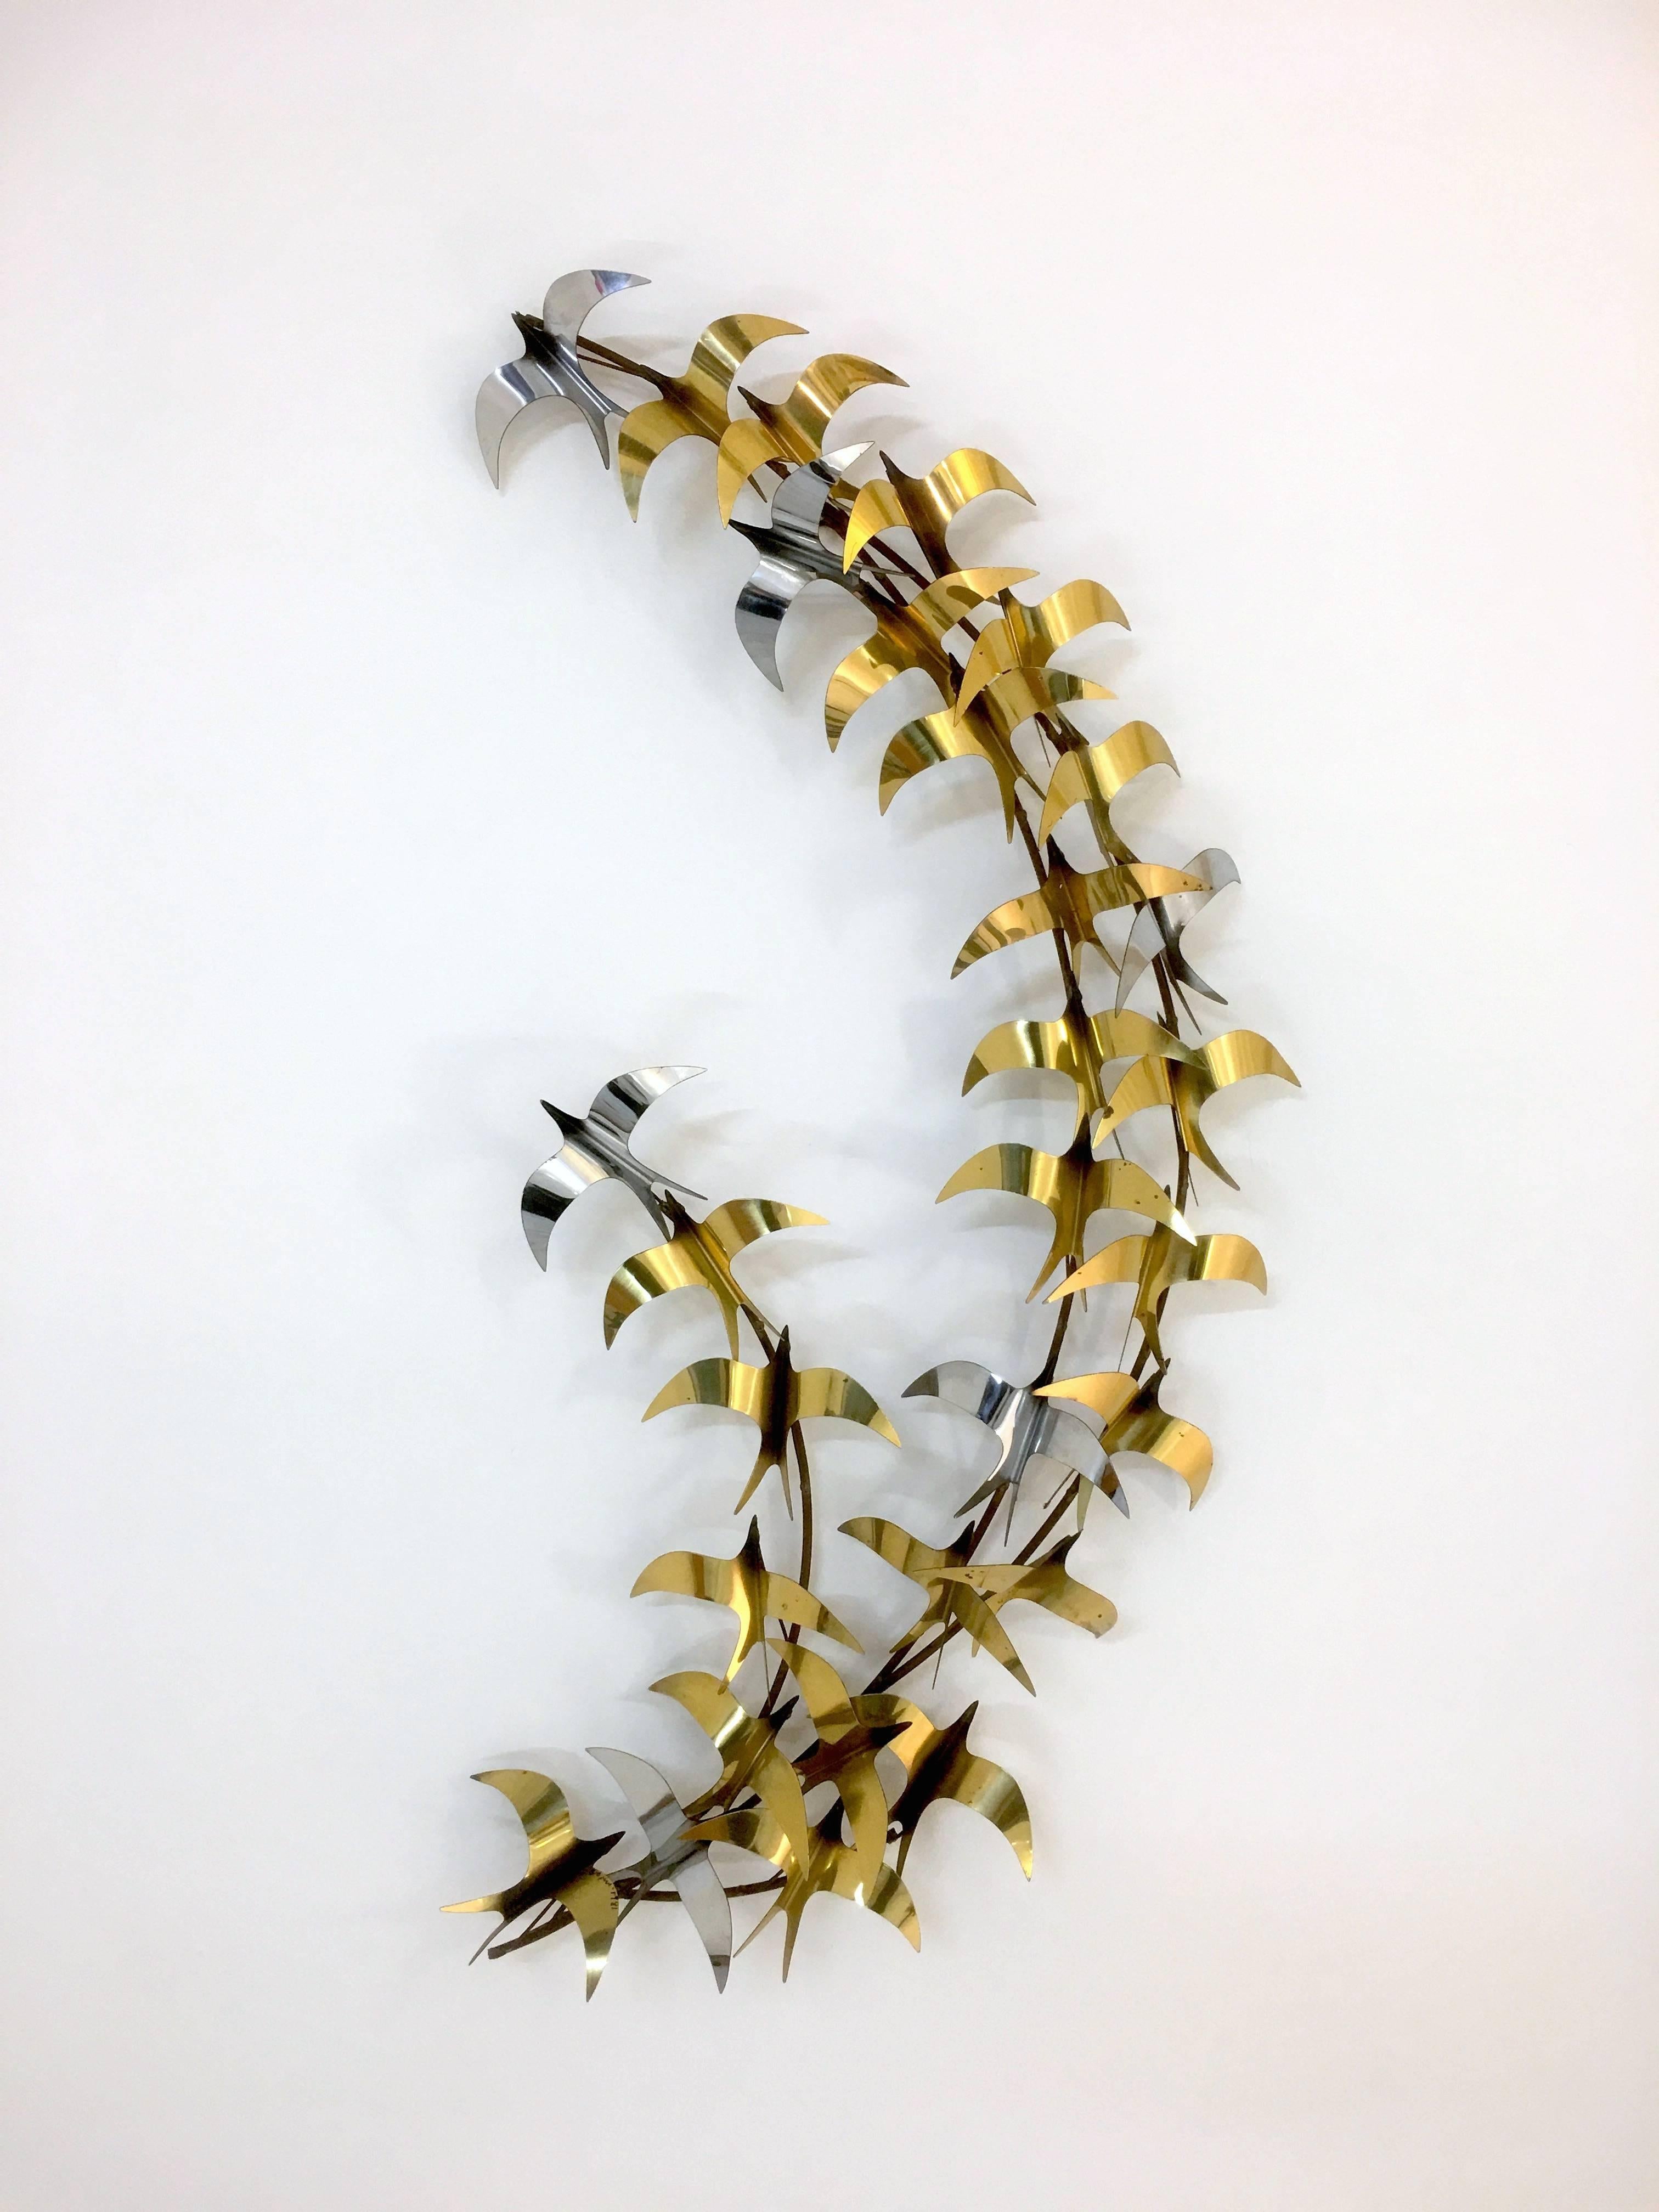 Curtis Jere
1981
Flock of birds
45 wide x 22 inches tall.

A large wall sculpture of birds in brass and chrome signed by Curtis Jere, 1981. Because it is raised, light will cast shadows of the birds onto the wall adding to the depth and feel of the